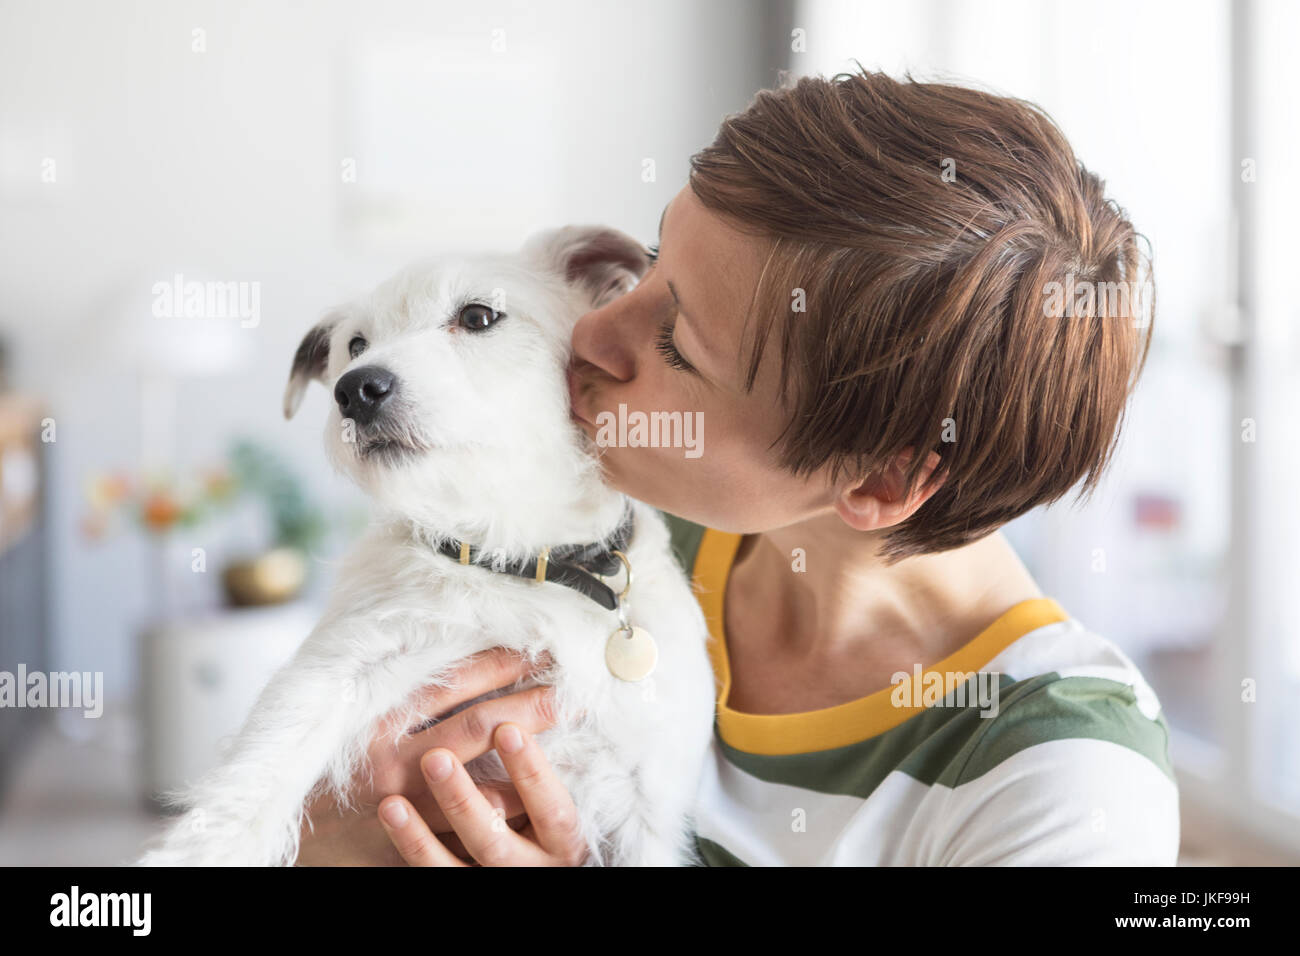 Woman kissing her dog Banque D'Images